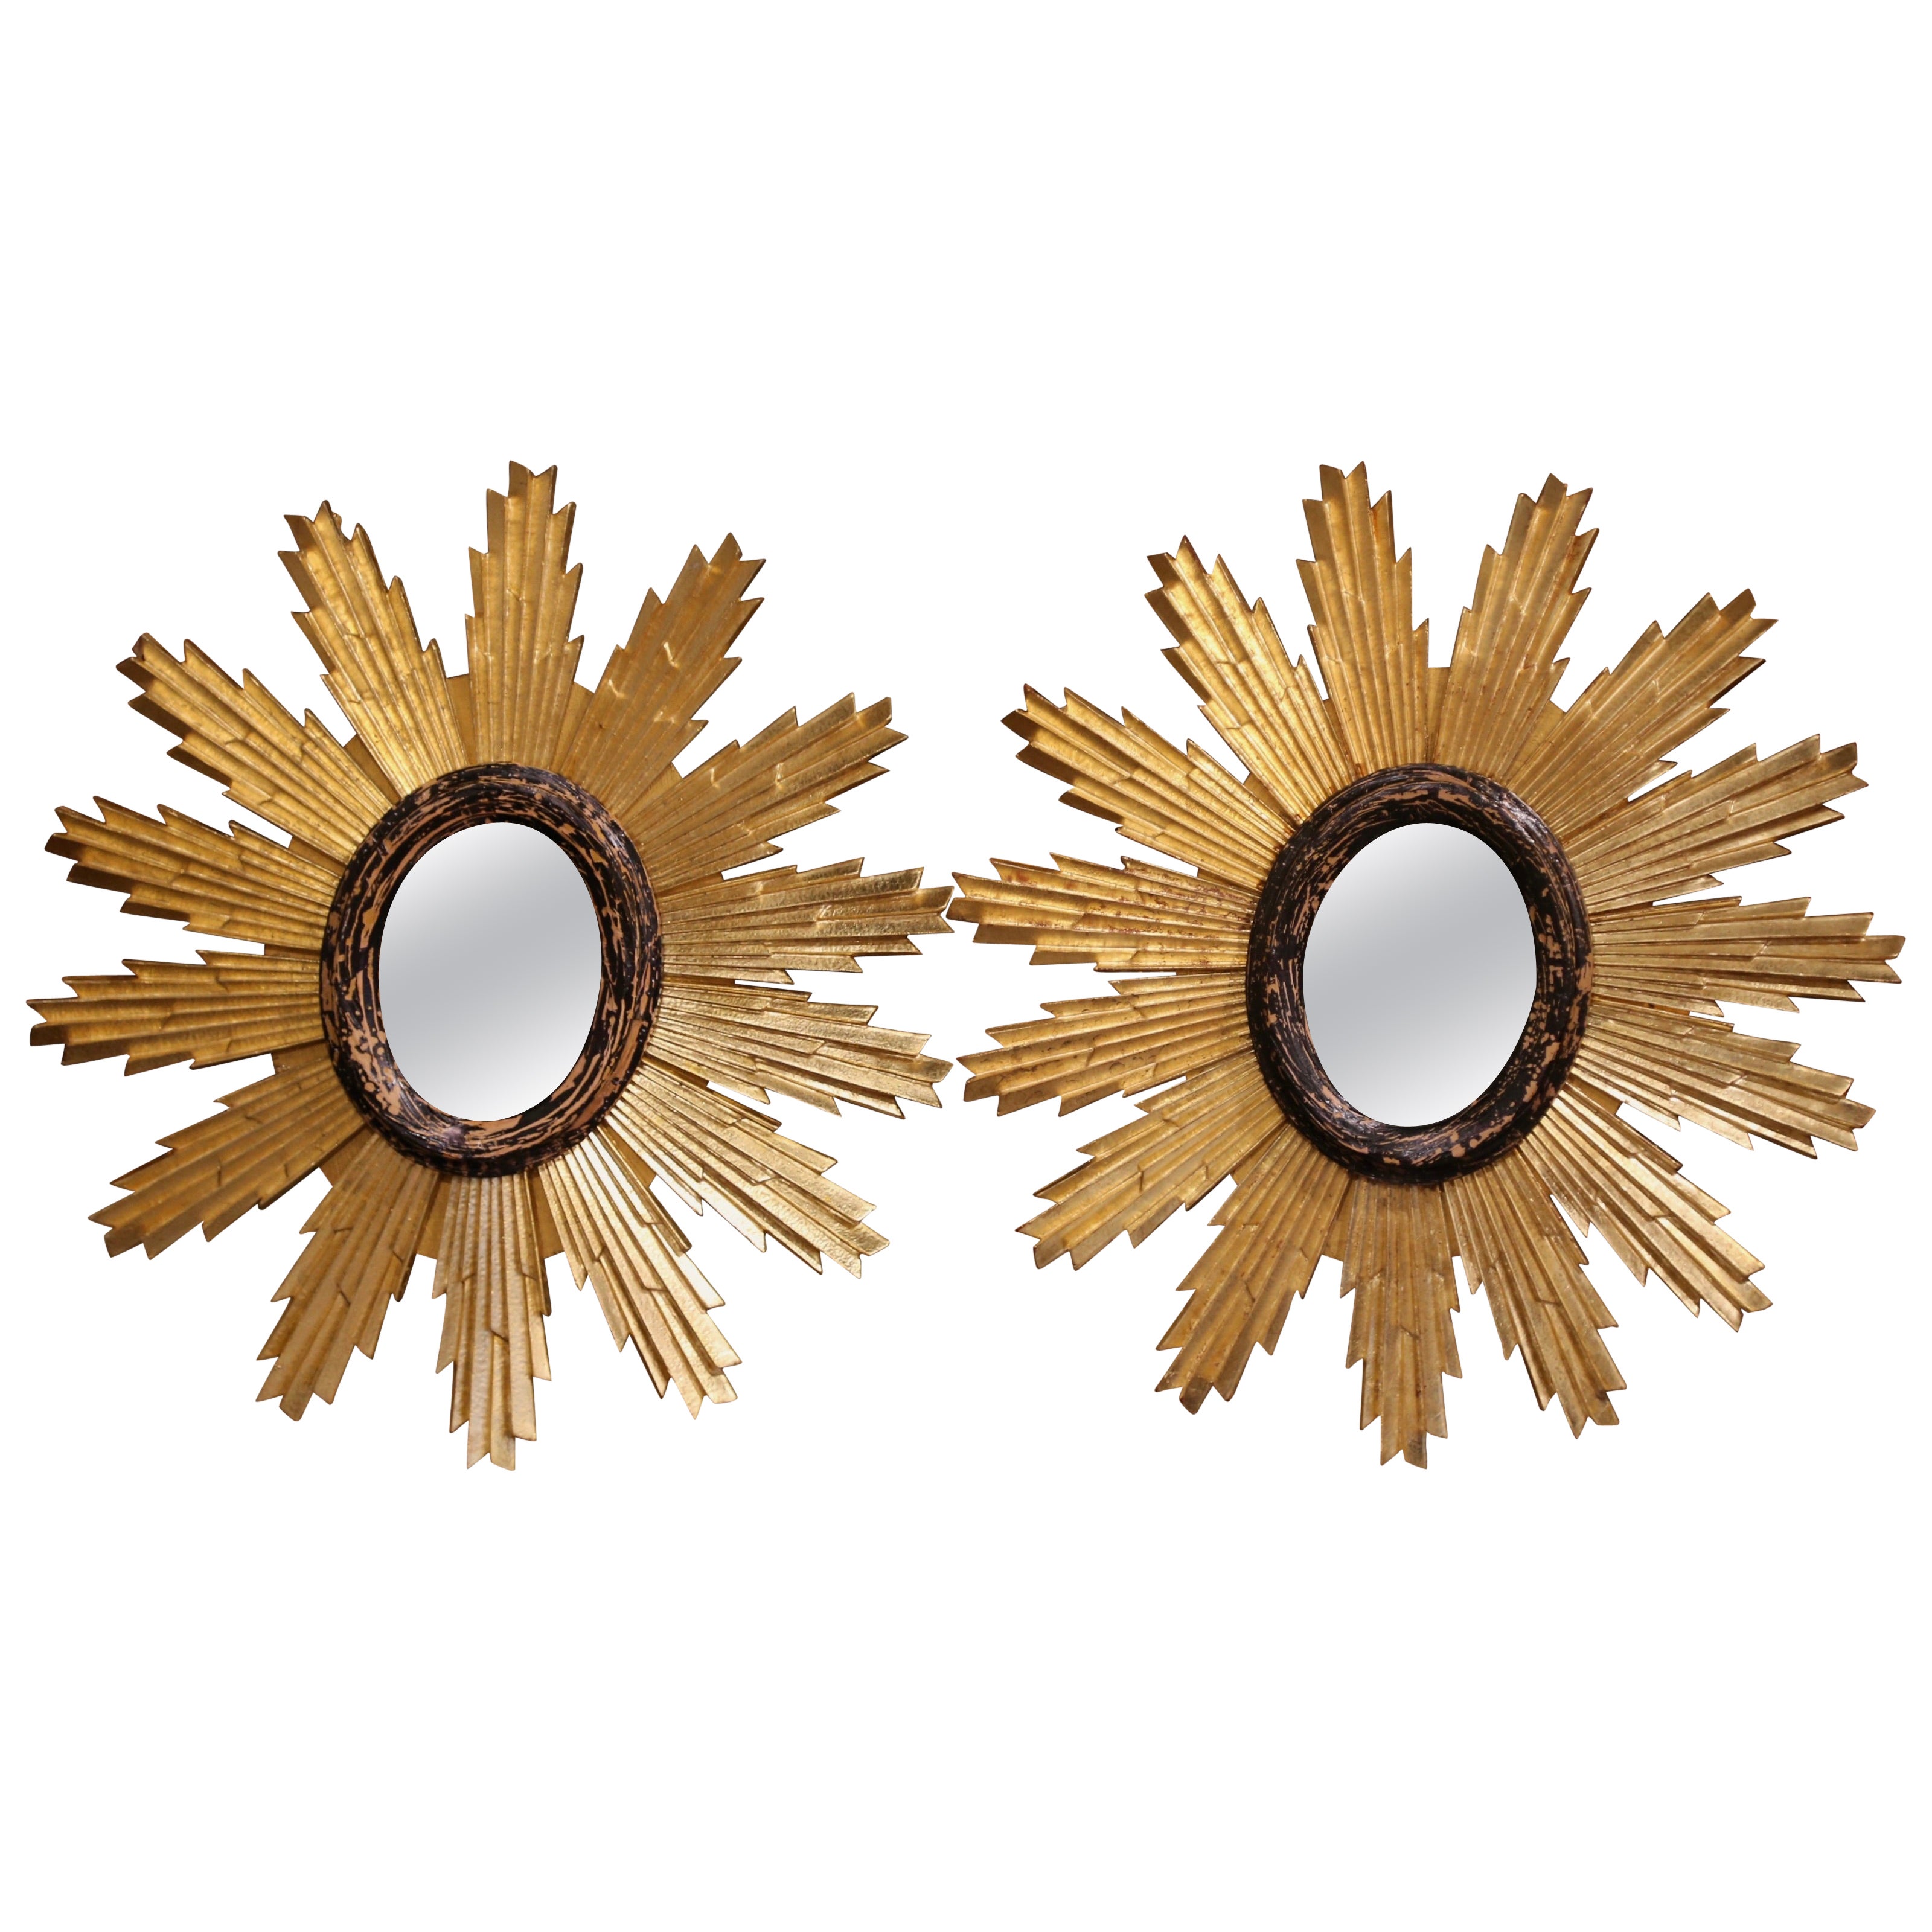 Pair of Italian Carved Two-Tone Giltwood and Blackened Wall Sunburst Mirrors